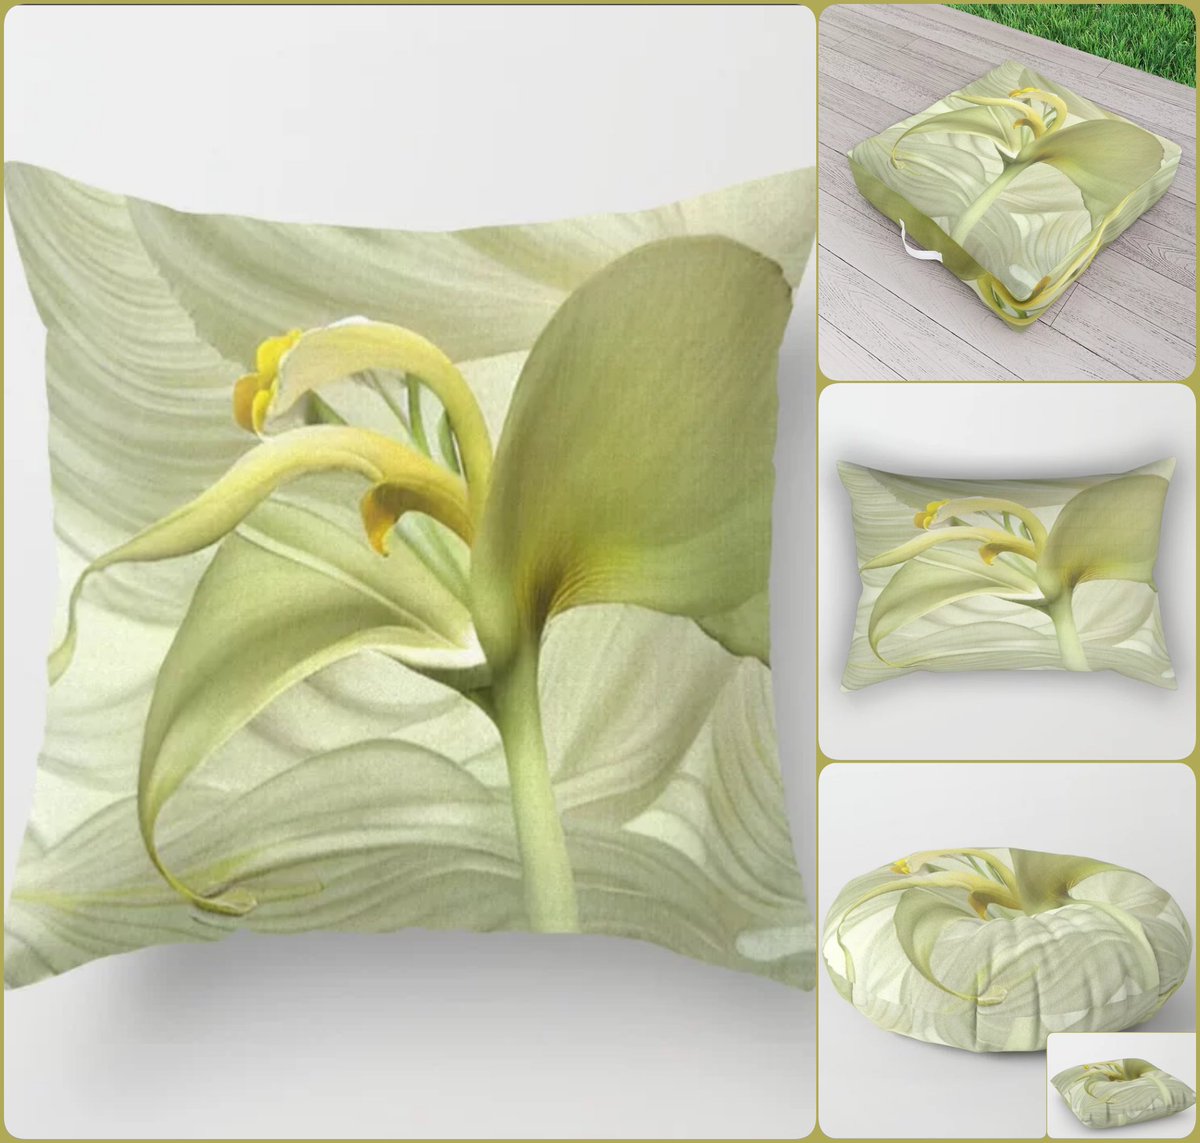 Bittersweet but Memorable Throw Pillow~by Art Falaxy~
~Unique Pillows!~
#artfalaxy #art #bedroom #pillows #homedecor #society6 #swirls #modern #trendy #accessories #accents #floorpillows #pillows #shams #blankets

society6.com/product/bitter…
COLLECTION: society6.com/art/bitterswee…